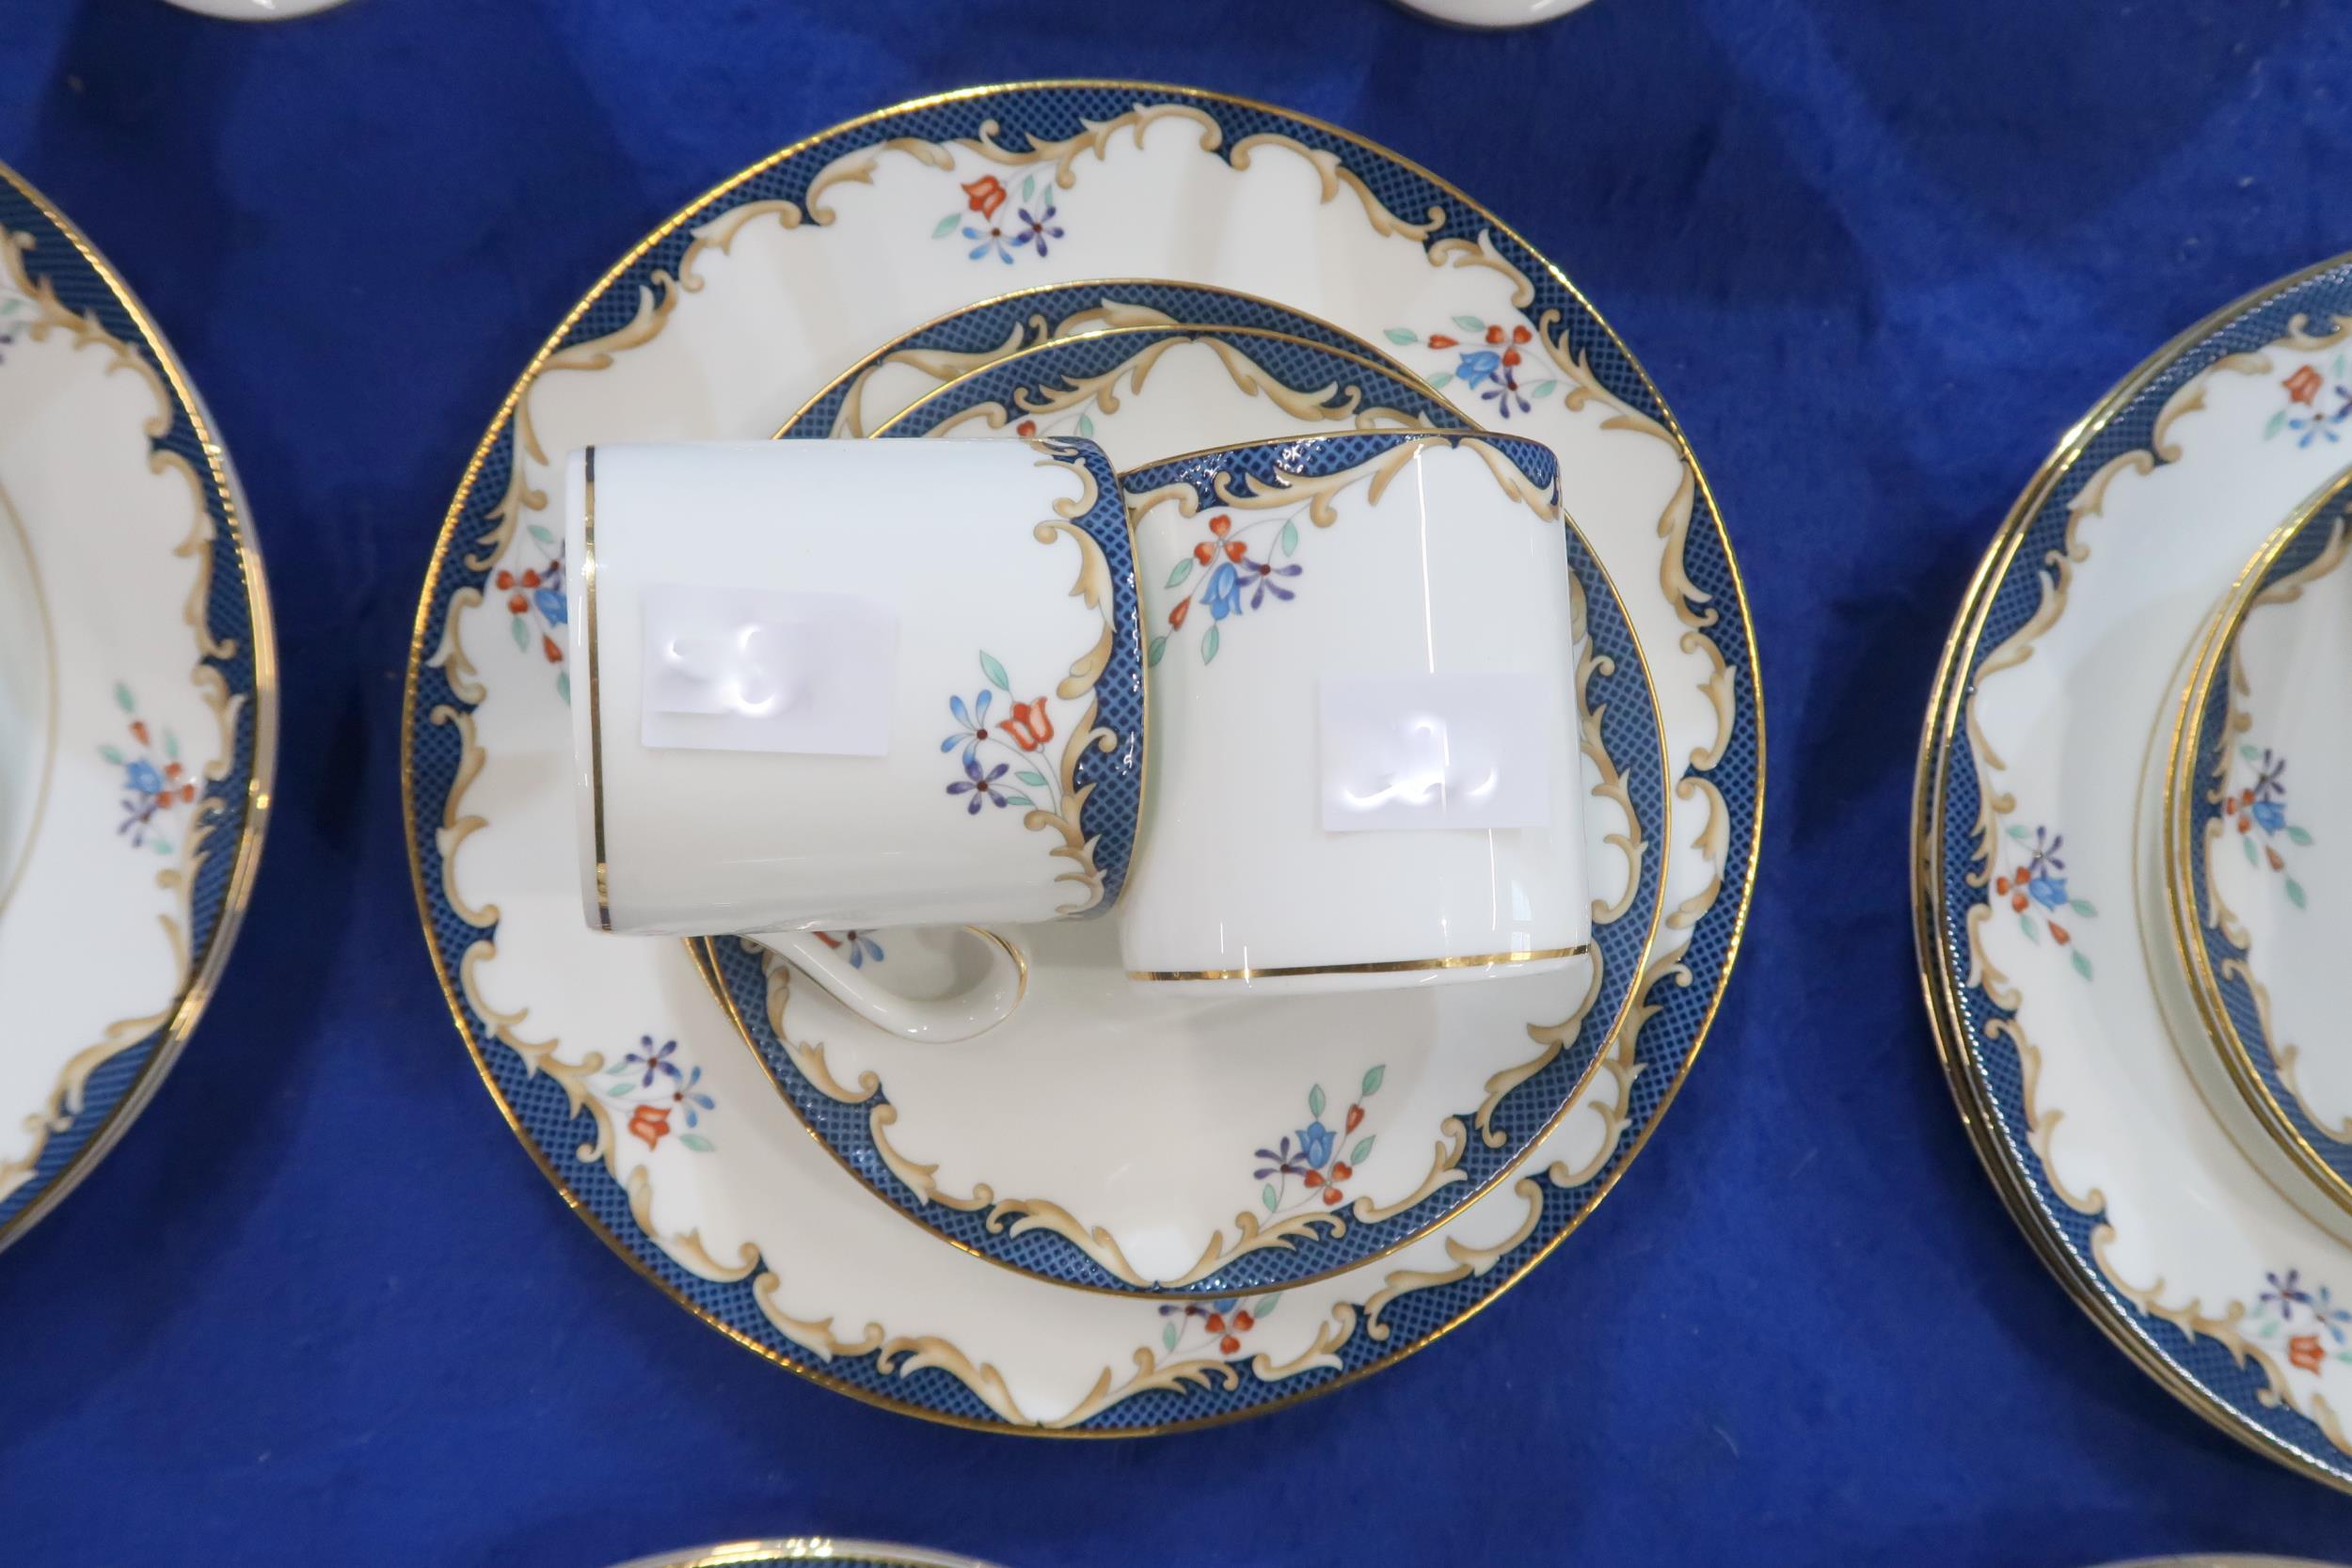 A Wedgwood Chartley pattern dinner service for twelve comprising plates, bowls, coffee cups and - Image 2 of 2